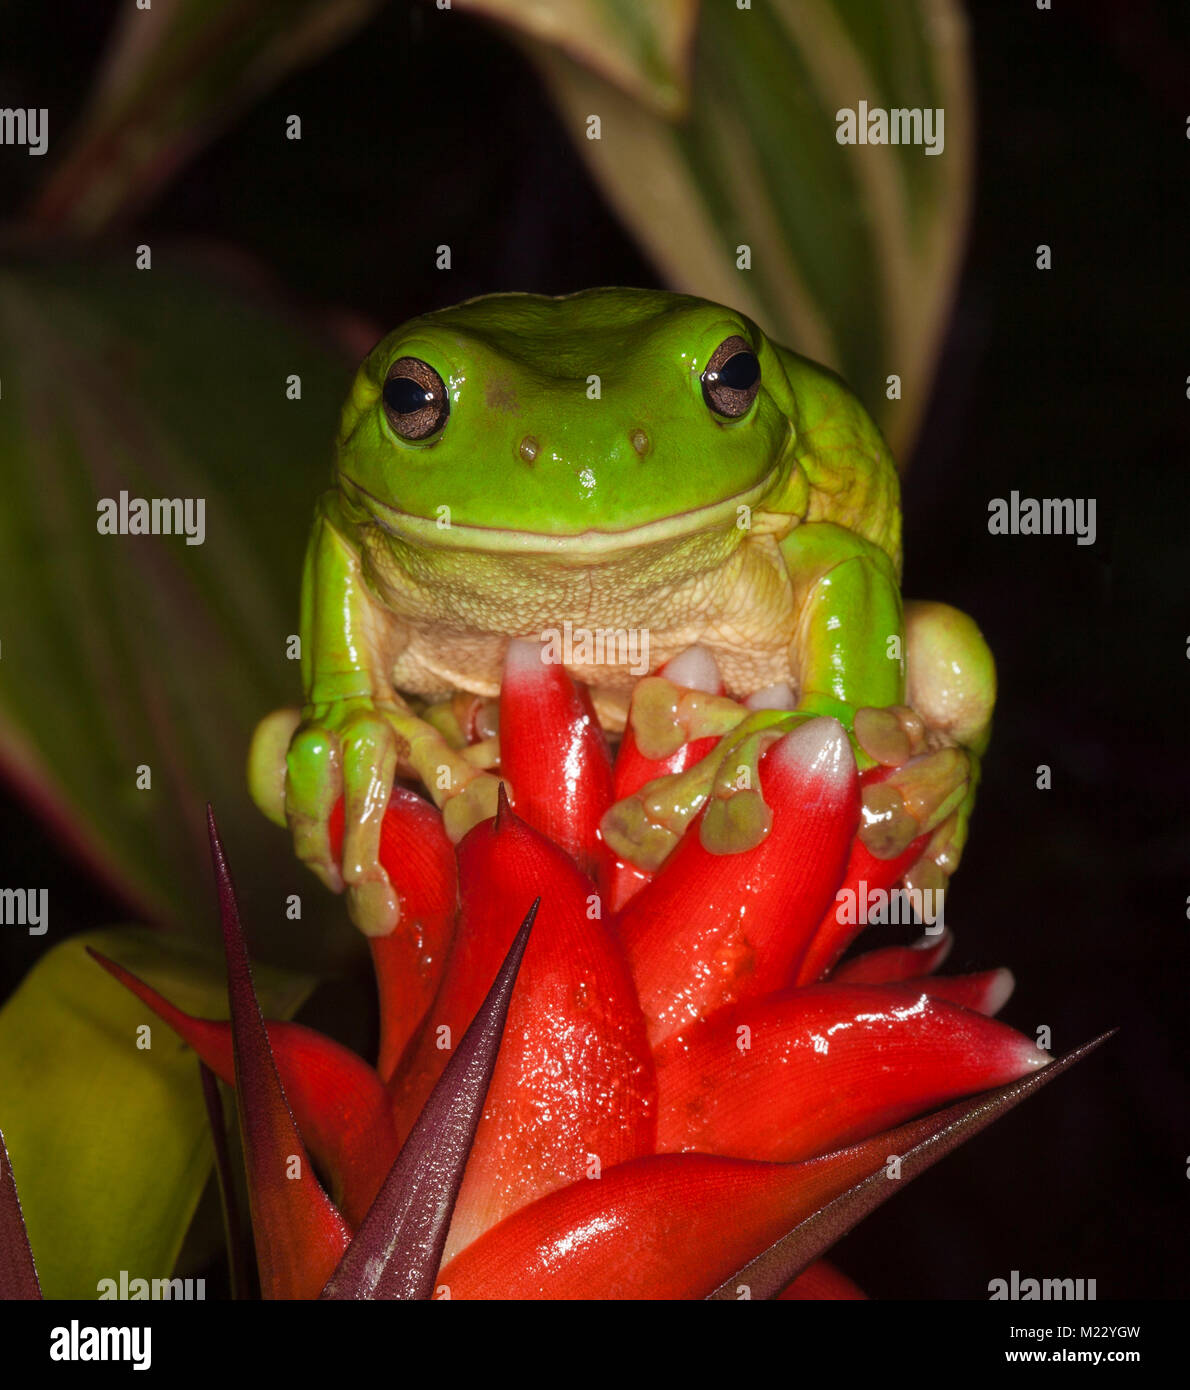 Vivid green Australian tree frog, Litoria caerulea, with wide grin on face, sitting on red flower of bromeliad (Guzmania), against dark background Stock Photo